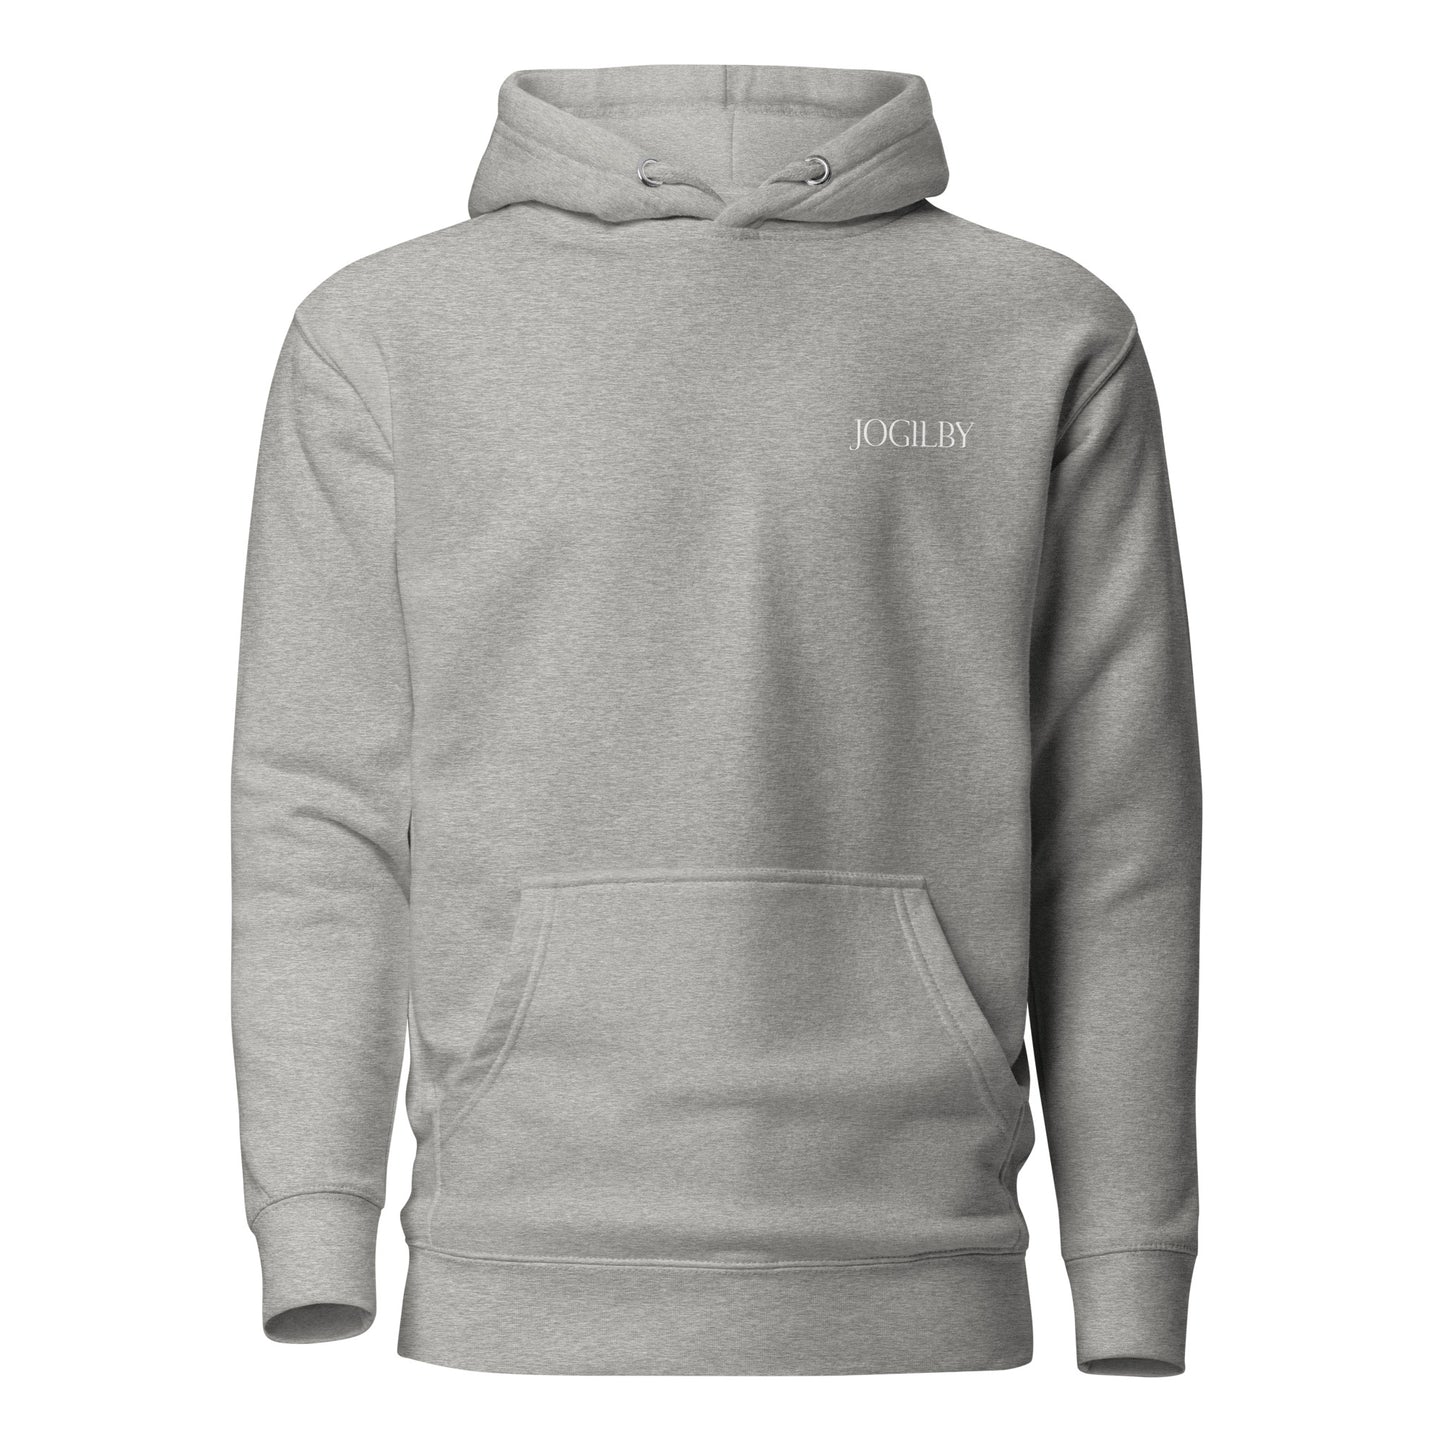 Jogilby Graphic Hoodie